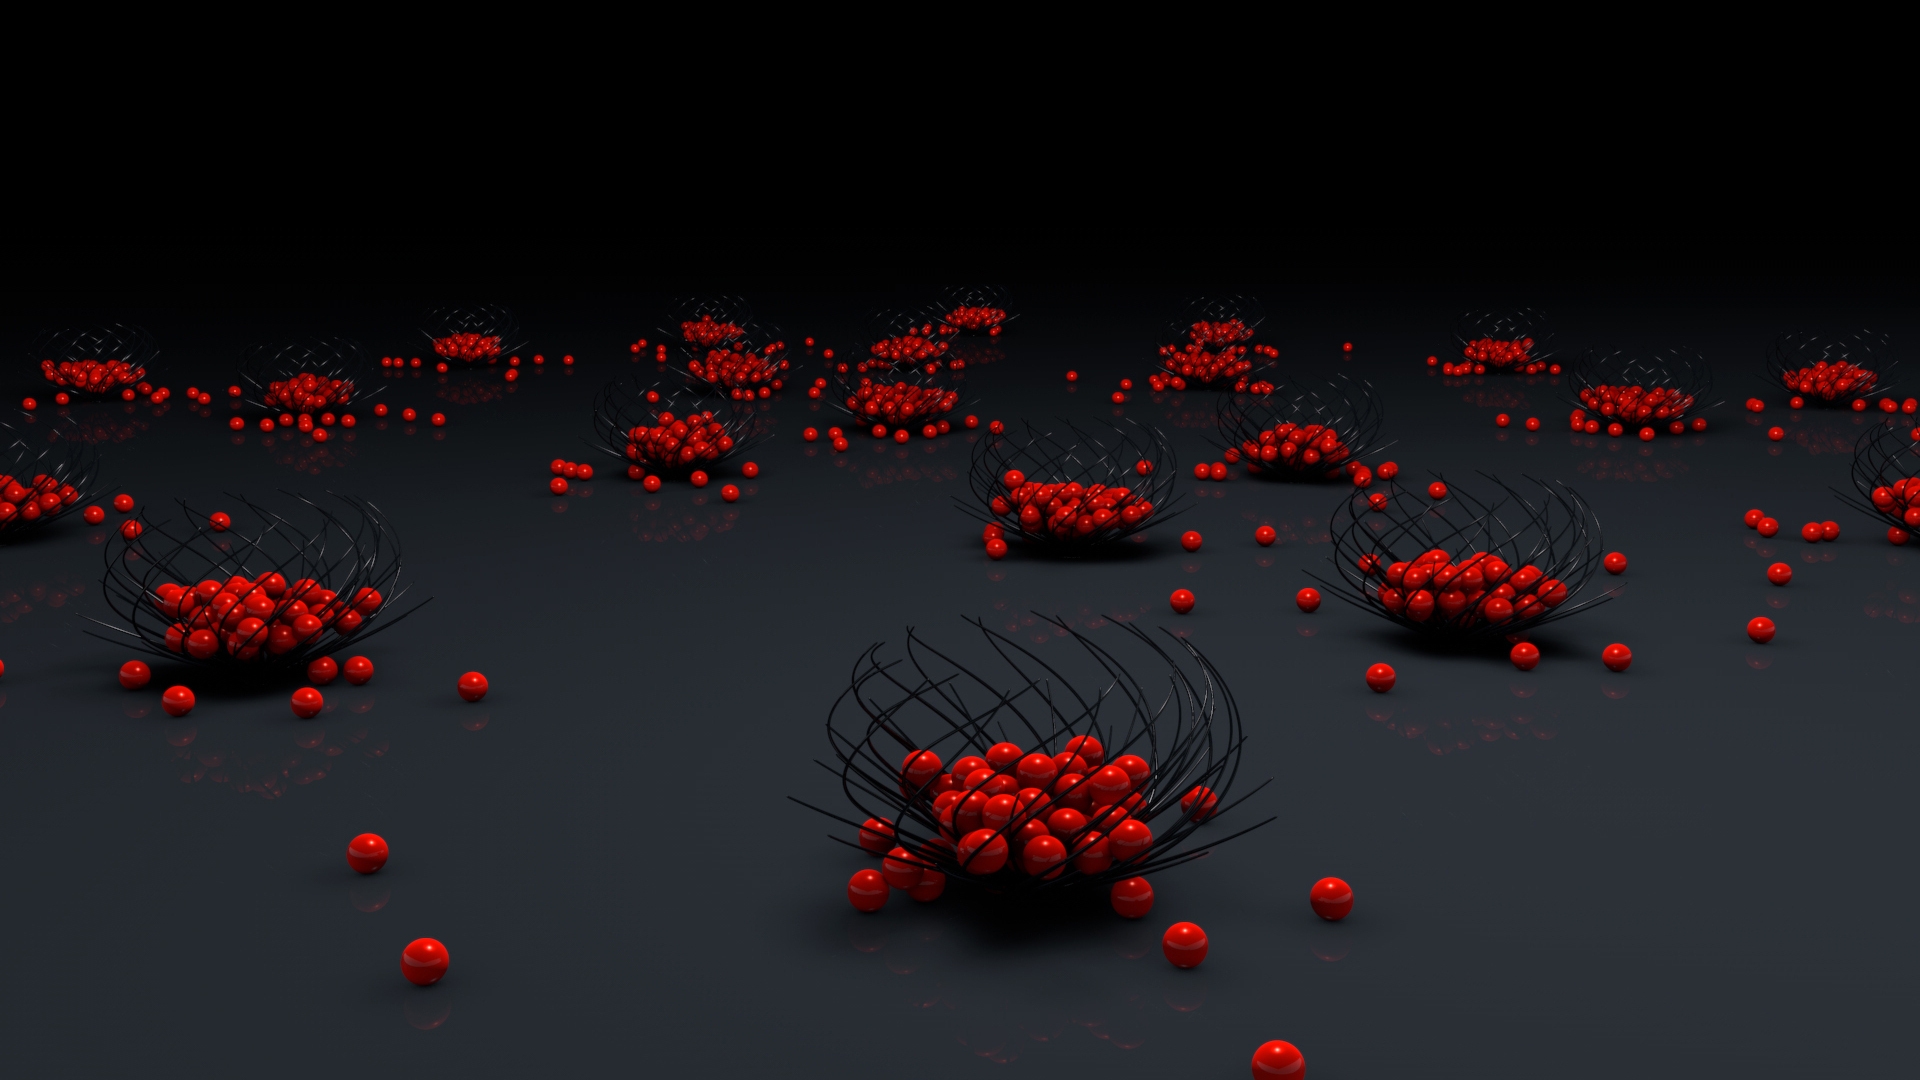 Red Balls for 1920 x 1080 HDTV 1080p resolution